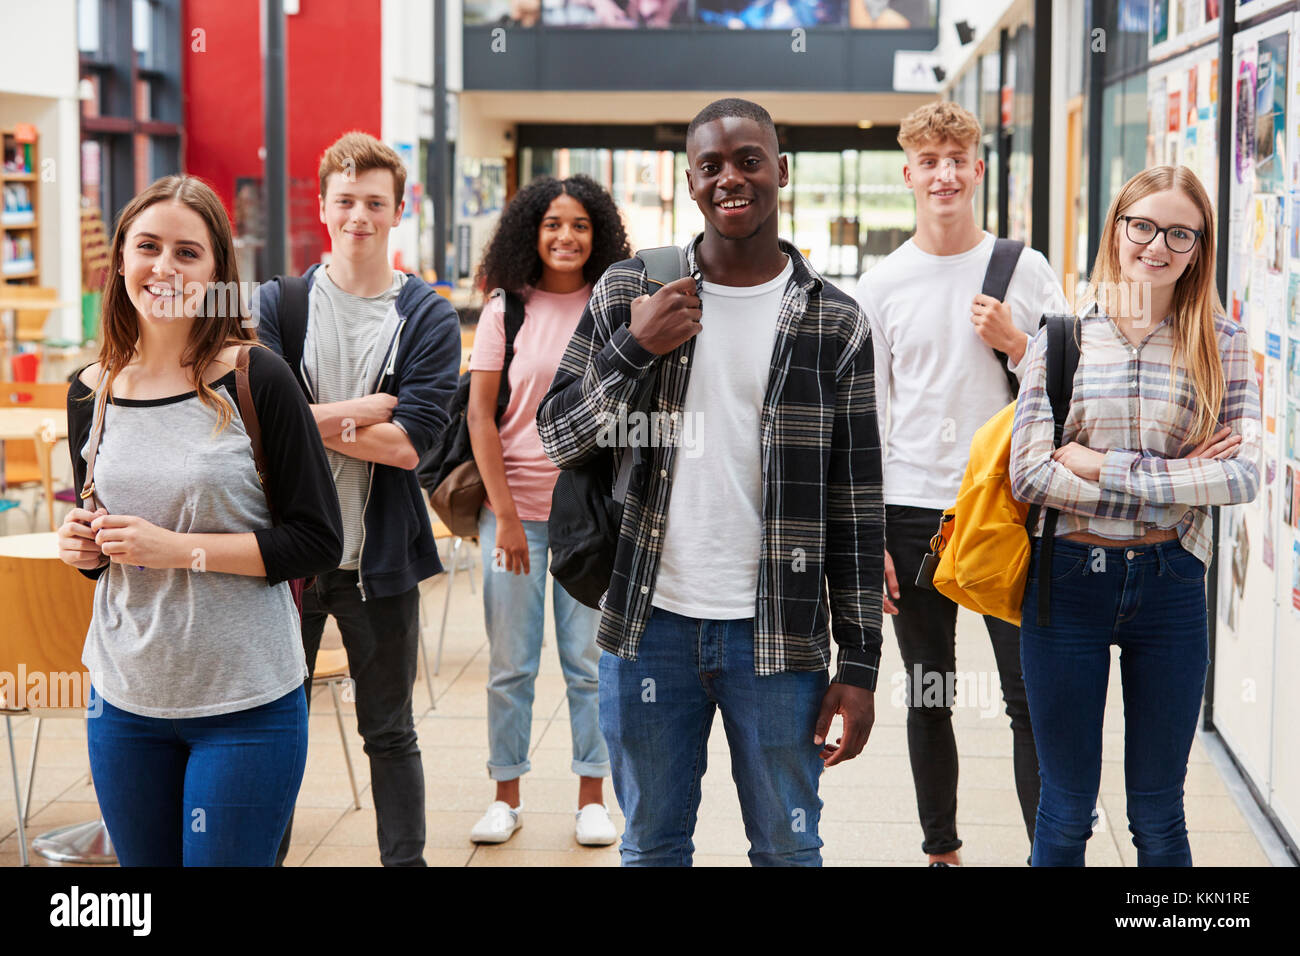 Portrait Of Student Group In Communal Area Of Busy College Stock Photo